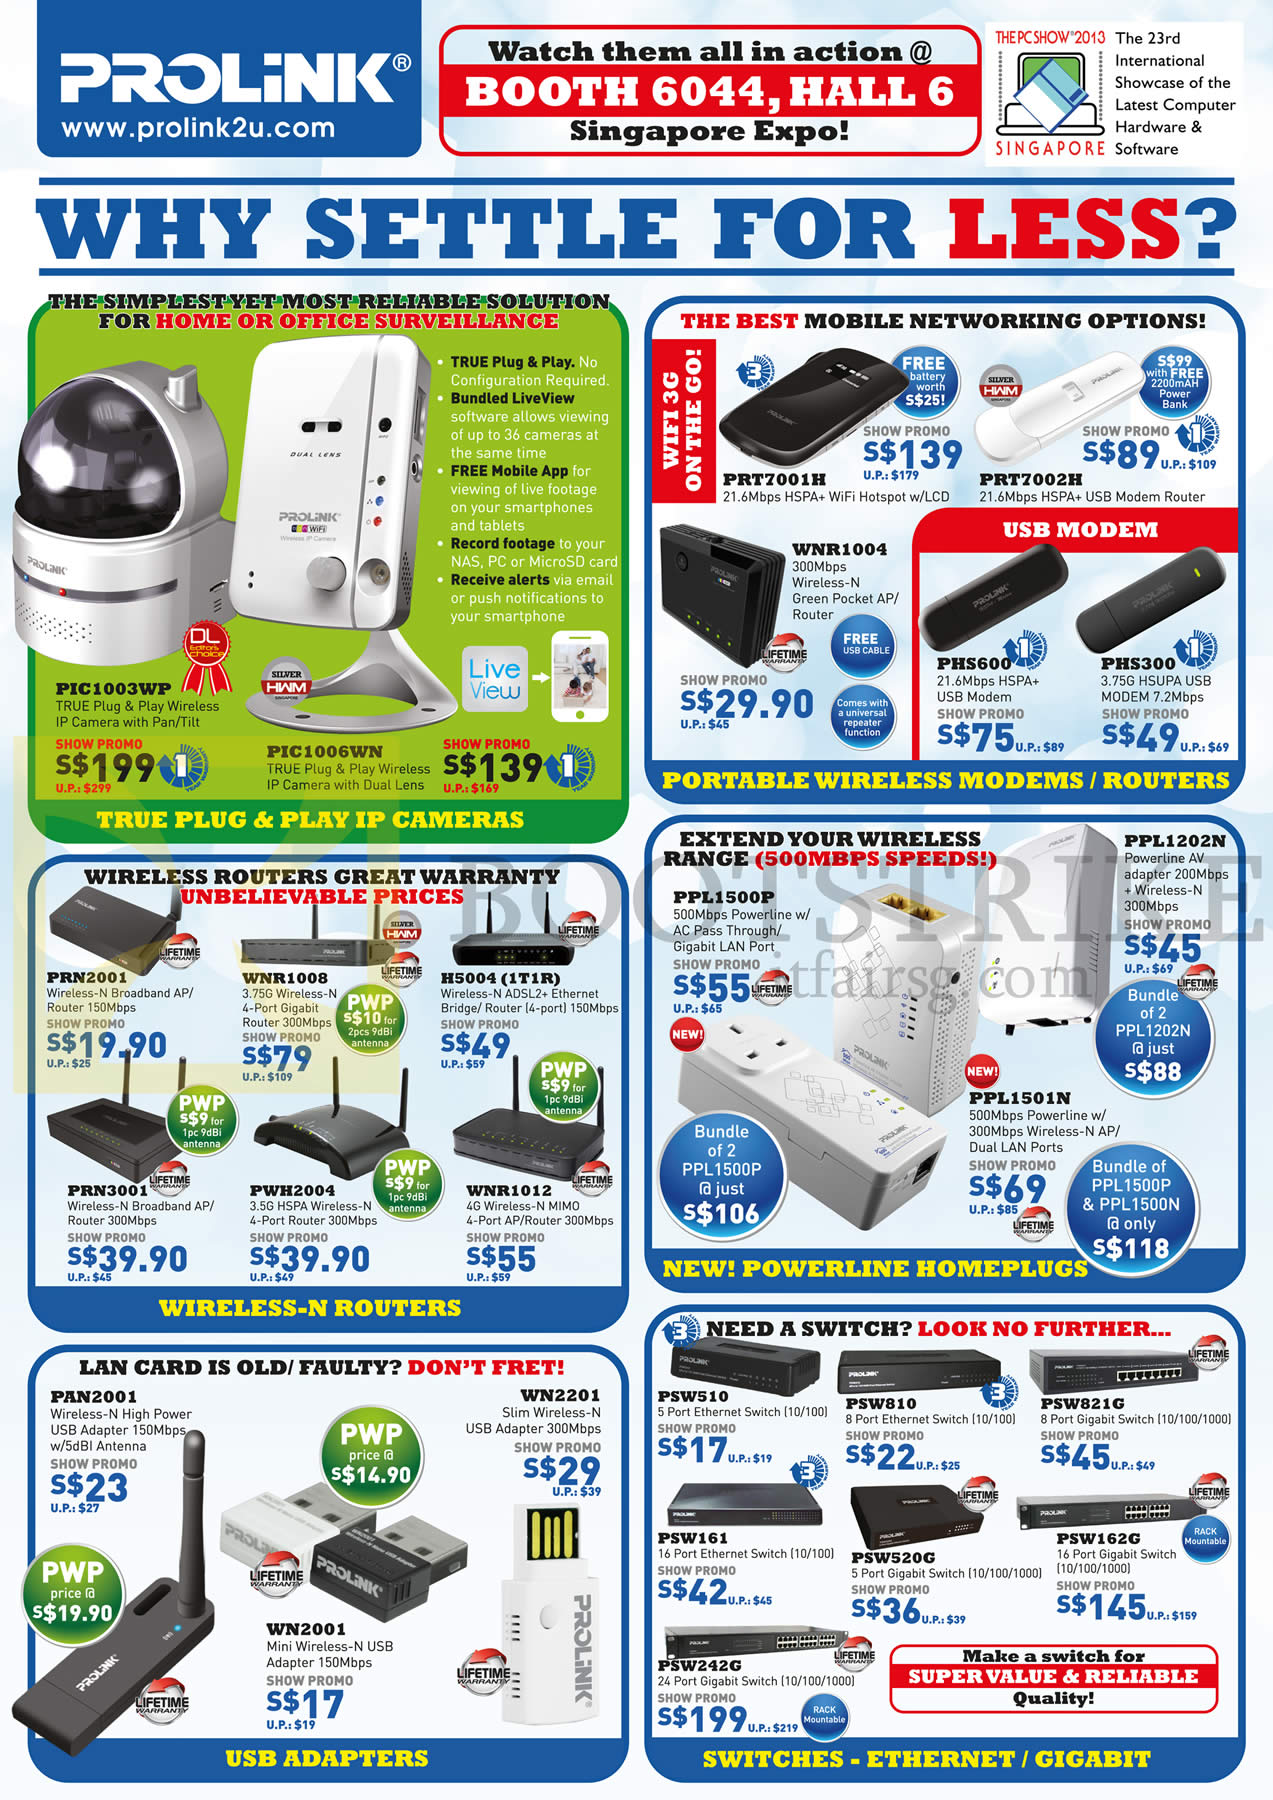 PC SHOW 2013 price list image brochure of Cybermind Prolink PIC1003WP IPCam, 3G WiFi Hotspot, Modem Router, Powerline HomePlugs Adapter, LAN Card, Switches